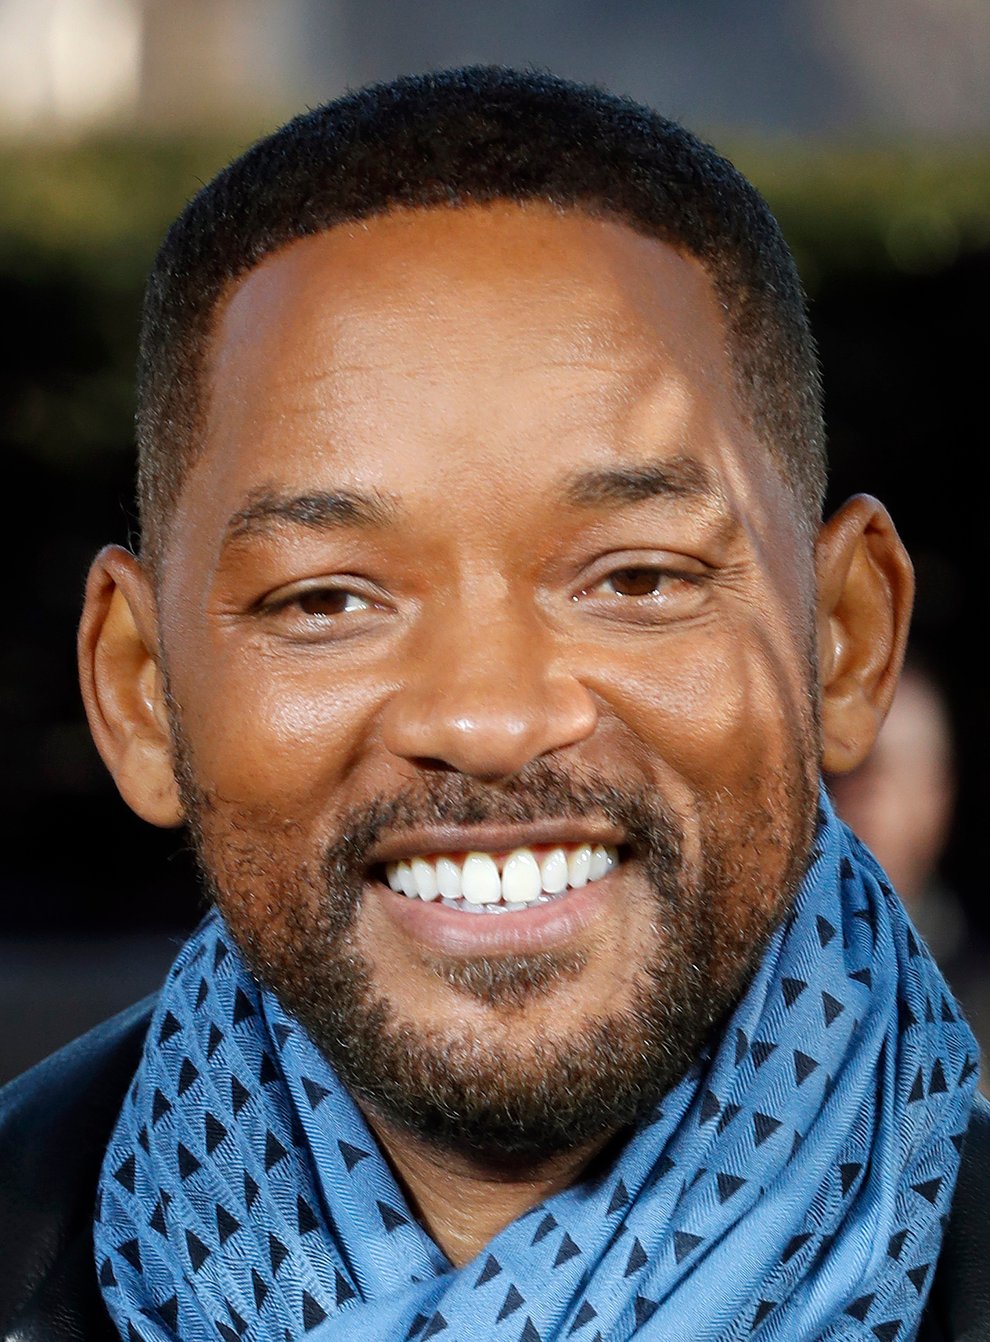 Actor and rapper Will Smith